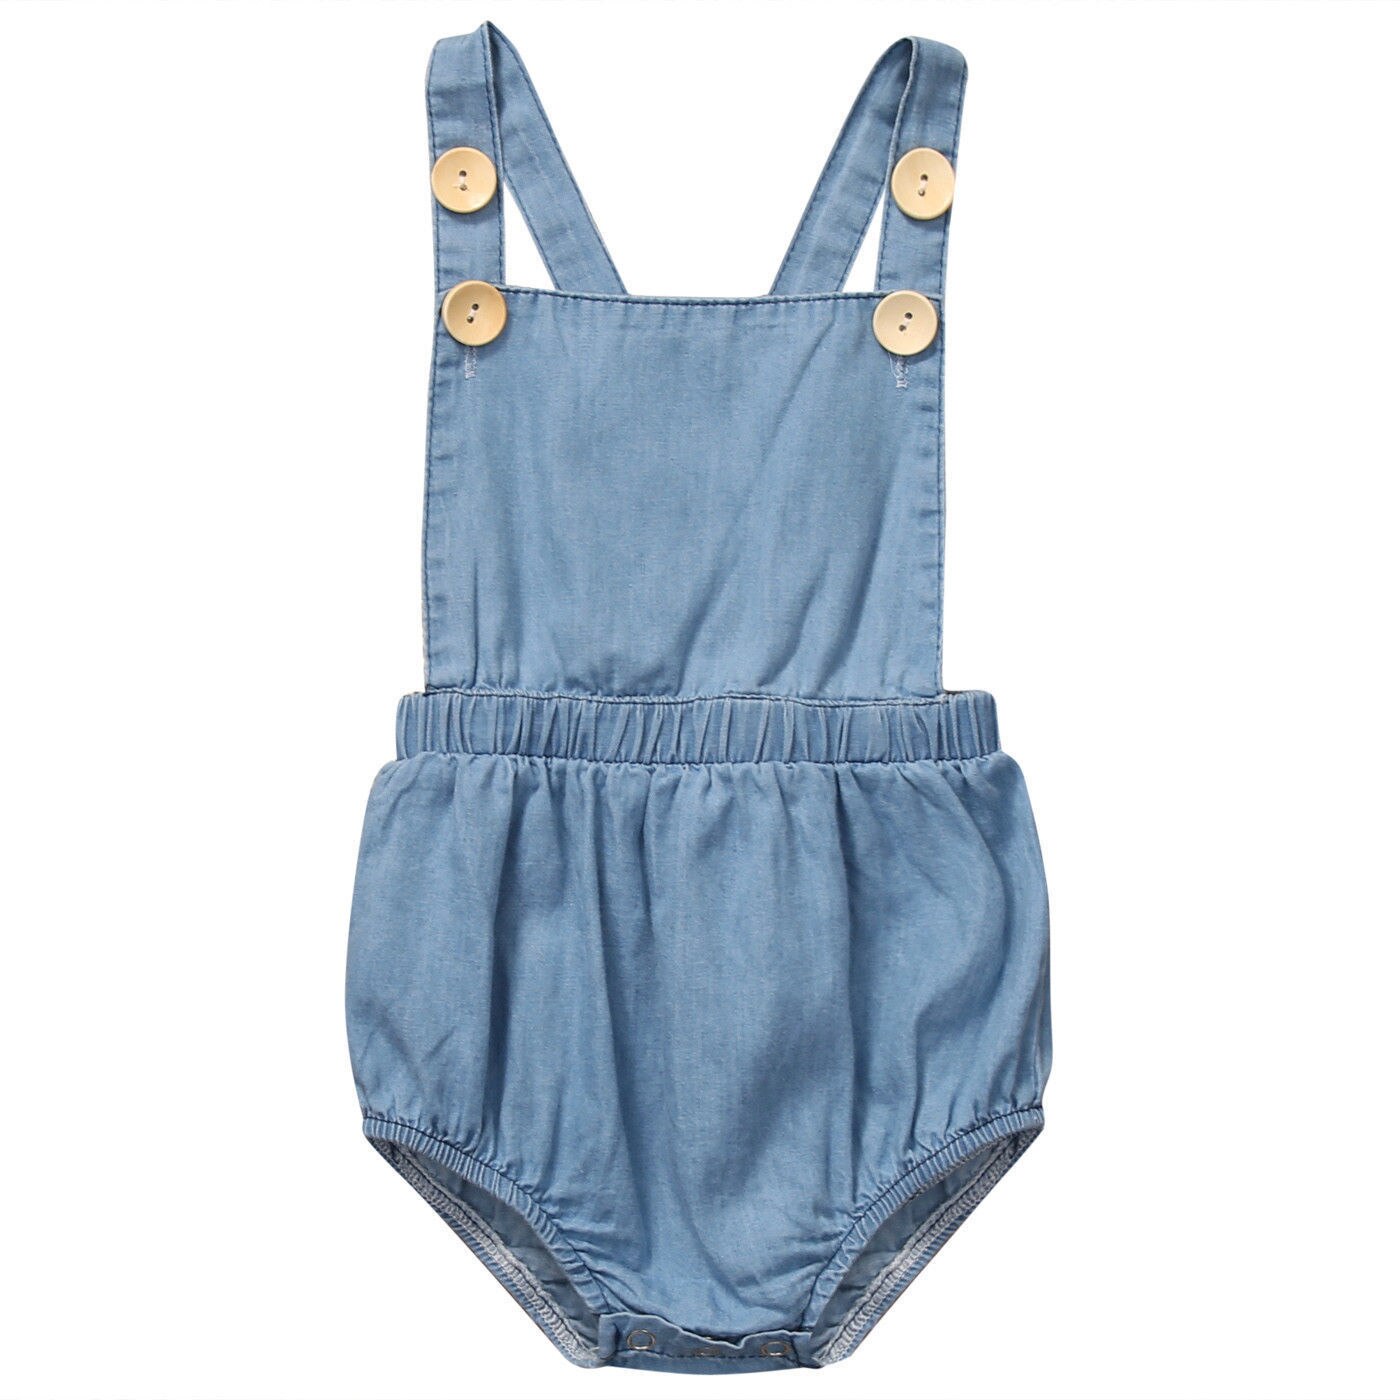 Denim Baby Girls Kid Sleeveless Bodysuits Jumpsuit Toddler Clothes Outfit - ebowsos